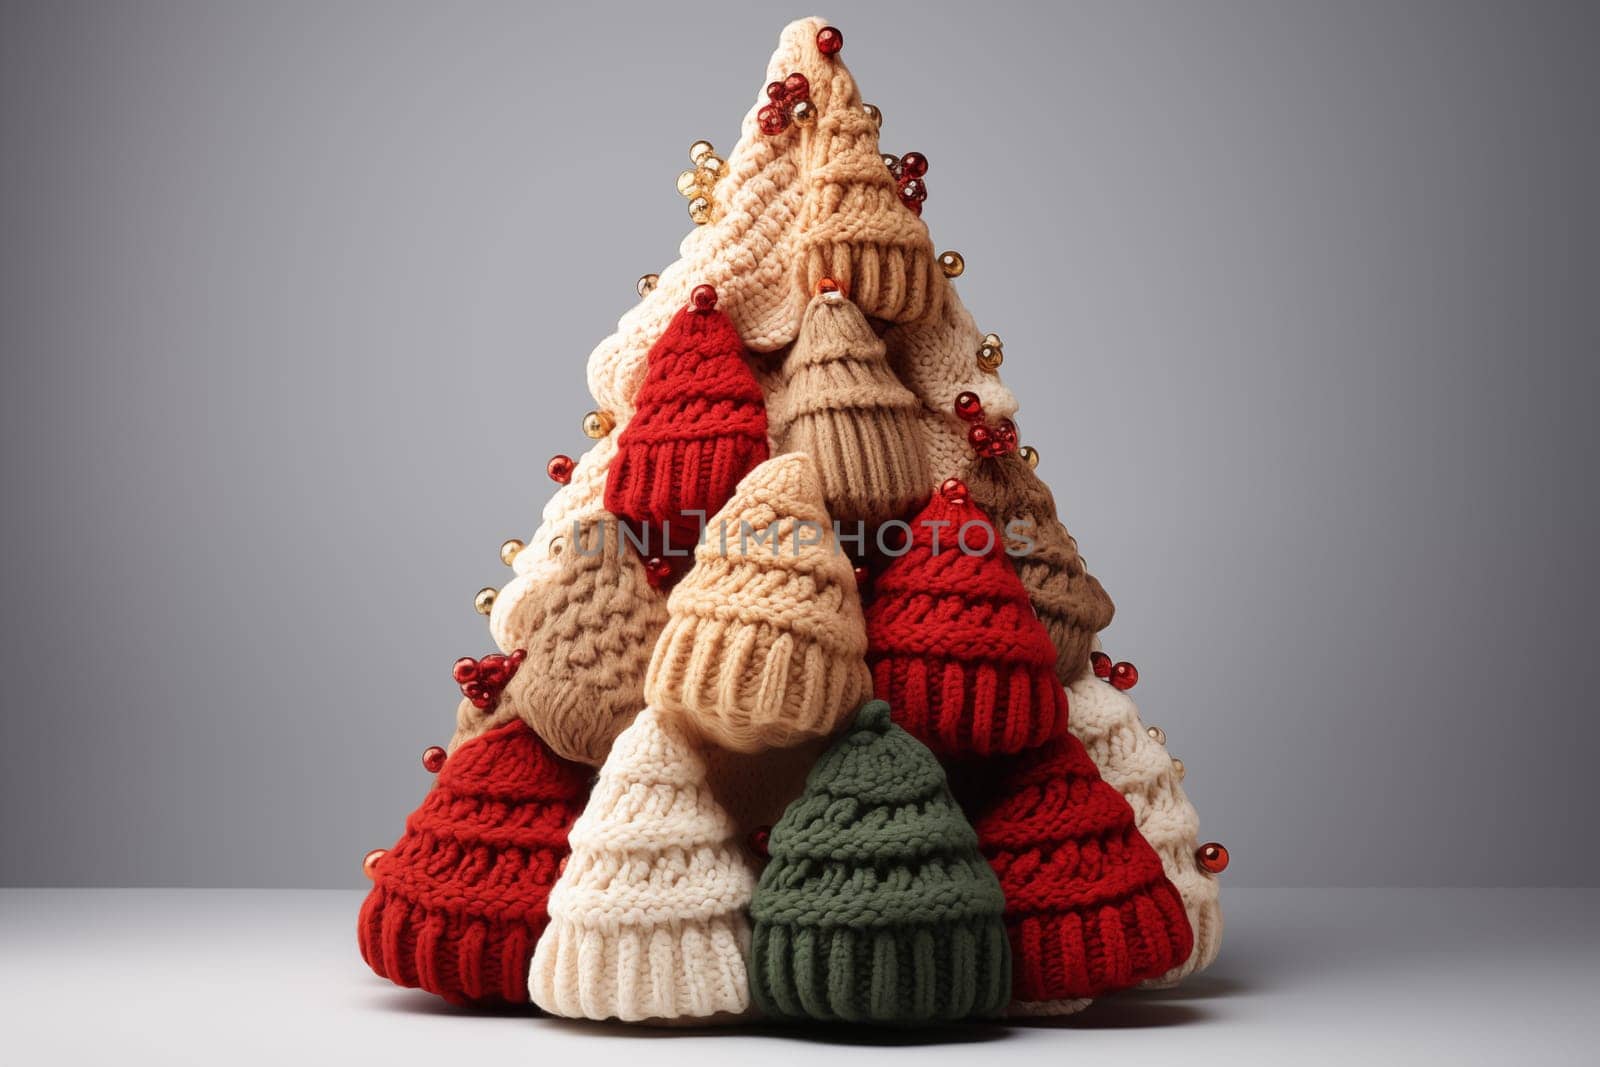 multicolor Creative knitted Christmas tree stand on a gray background.